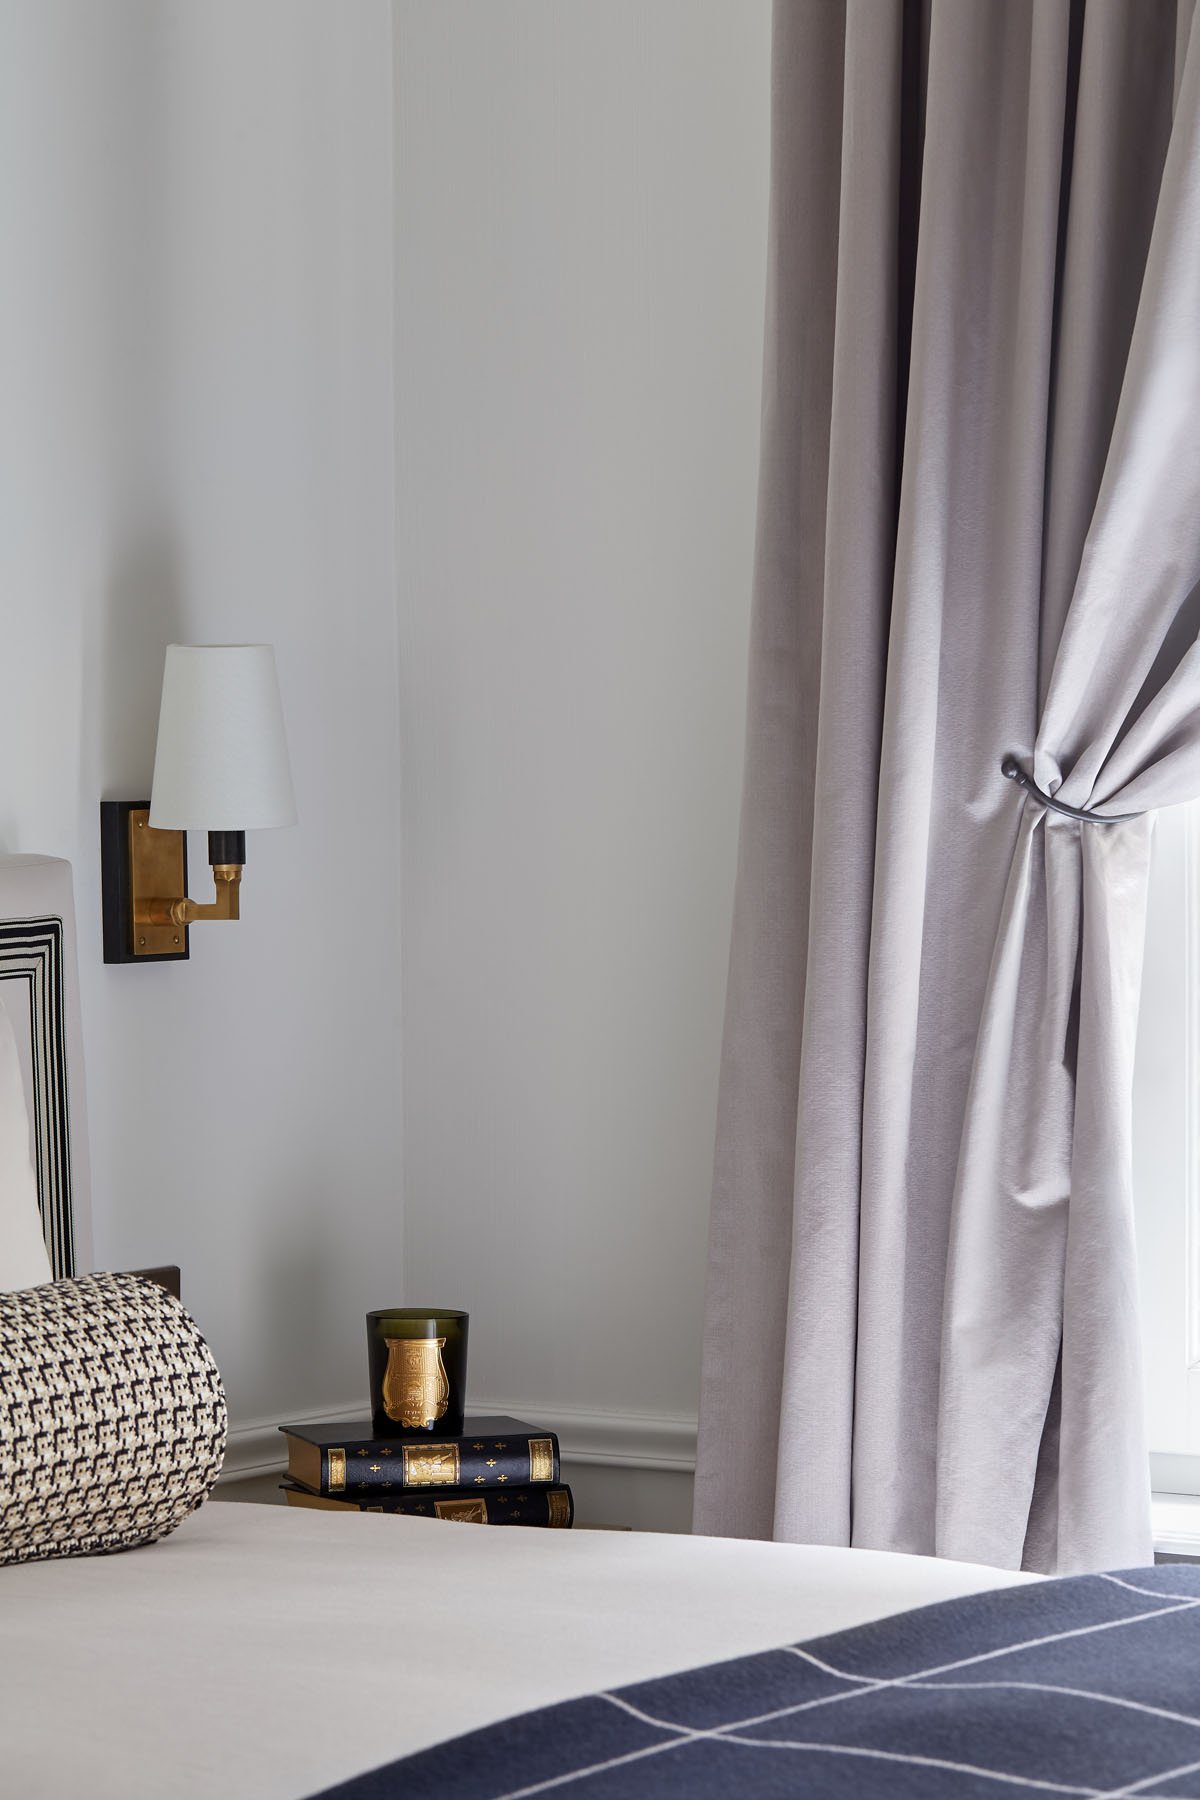  Curtains are as important as furniture. The pinch pleat heading gives a tailored look that I adore. 